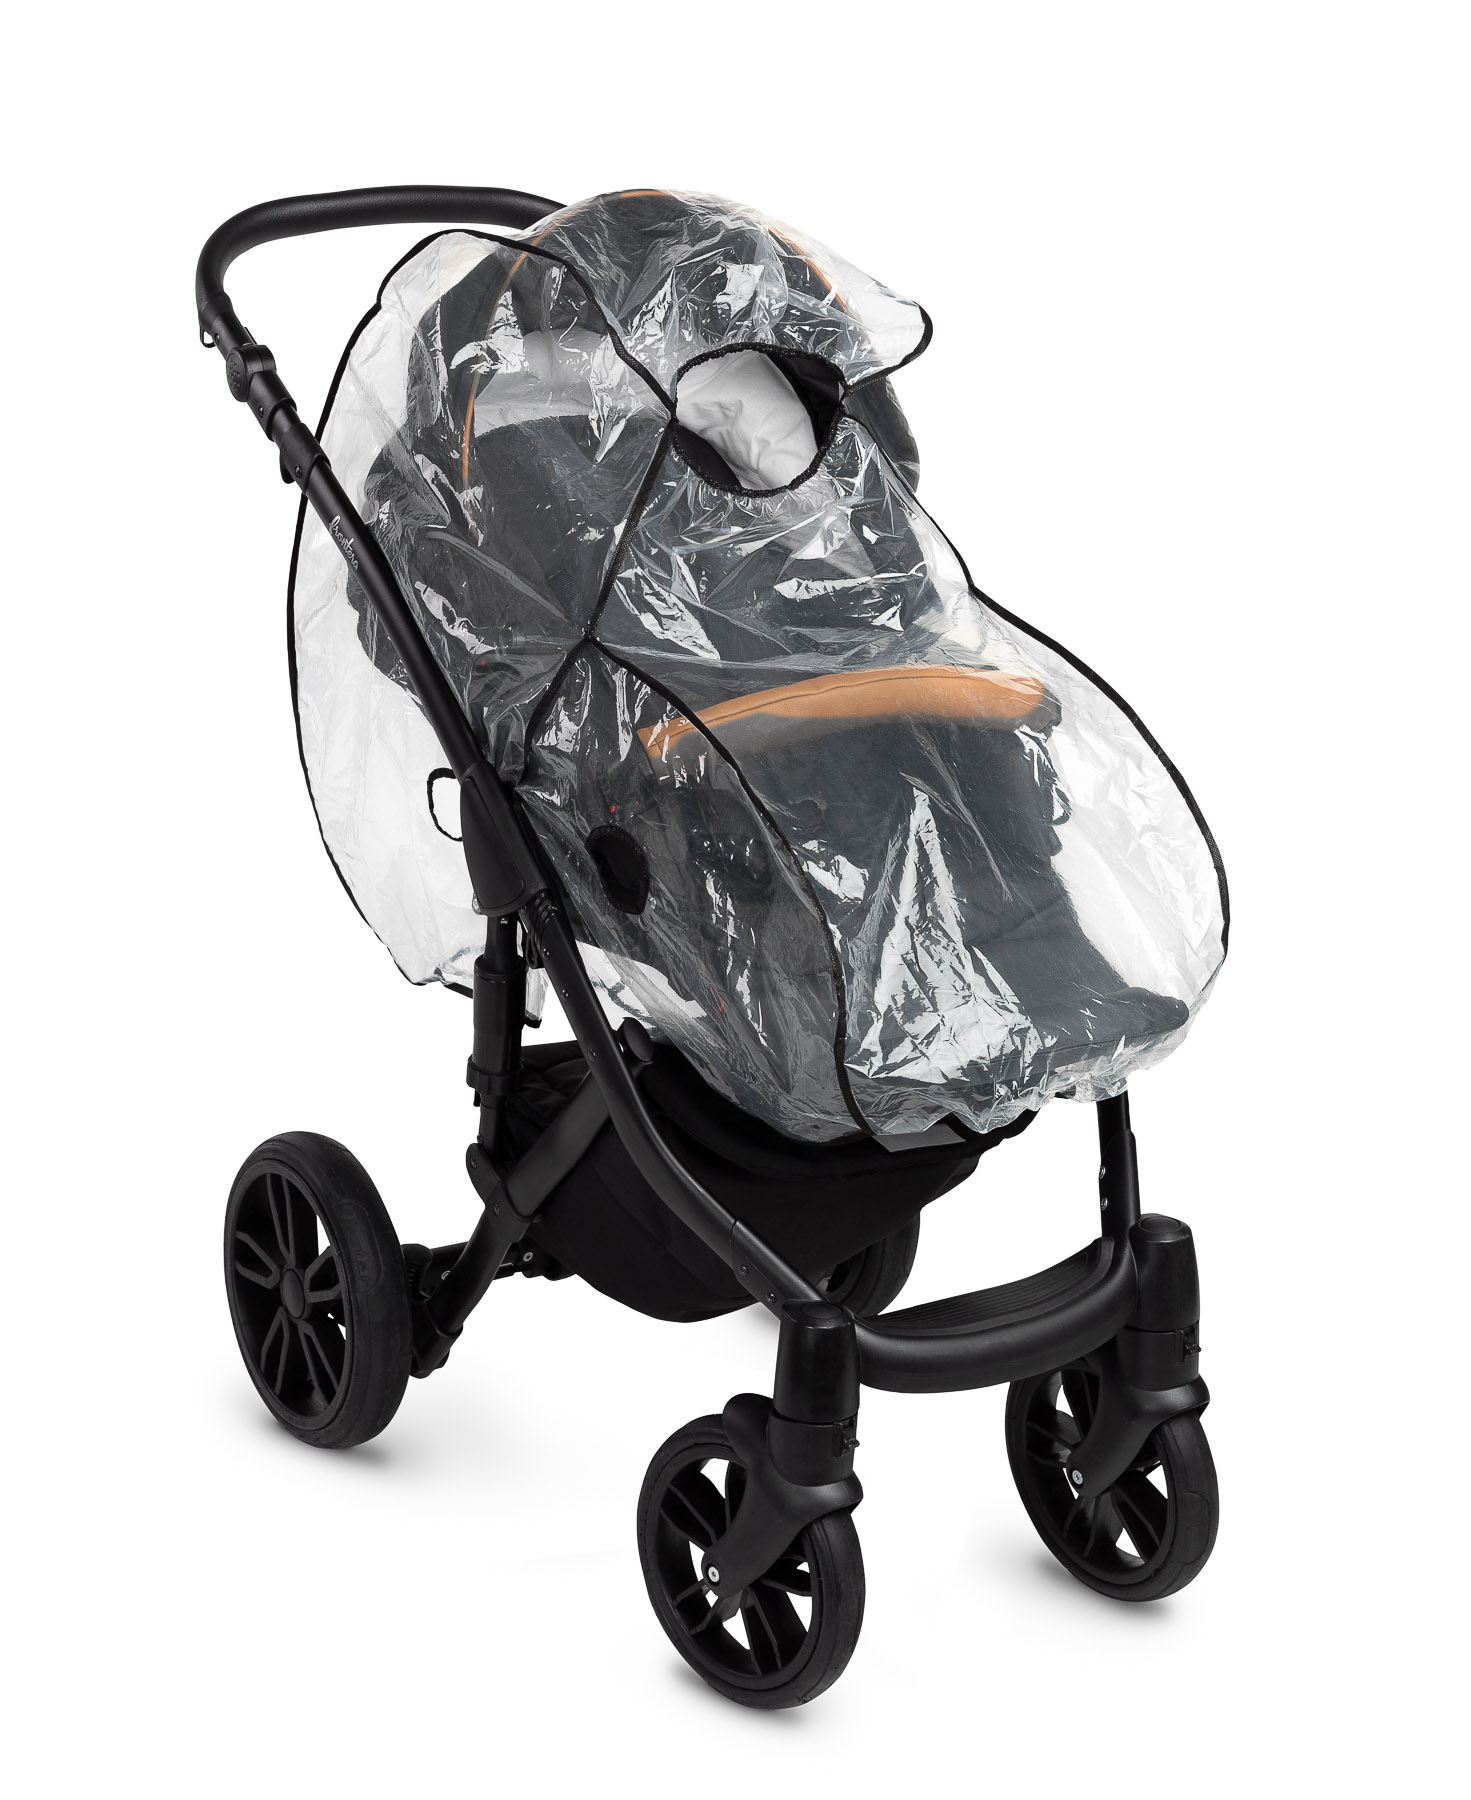 Rain cover for strollers with split handles